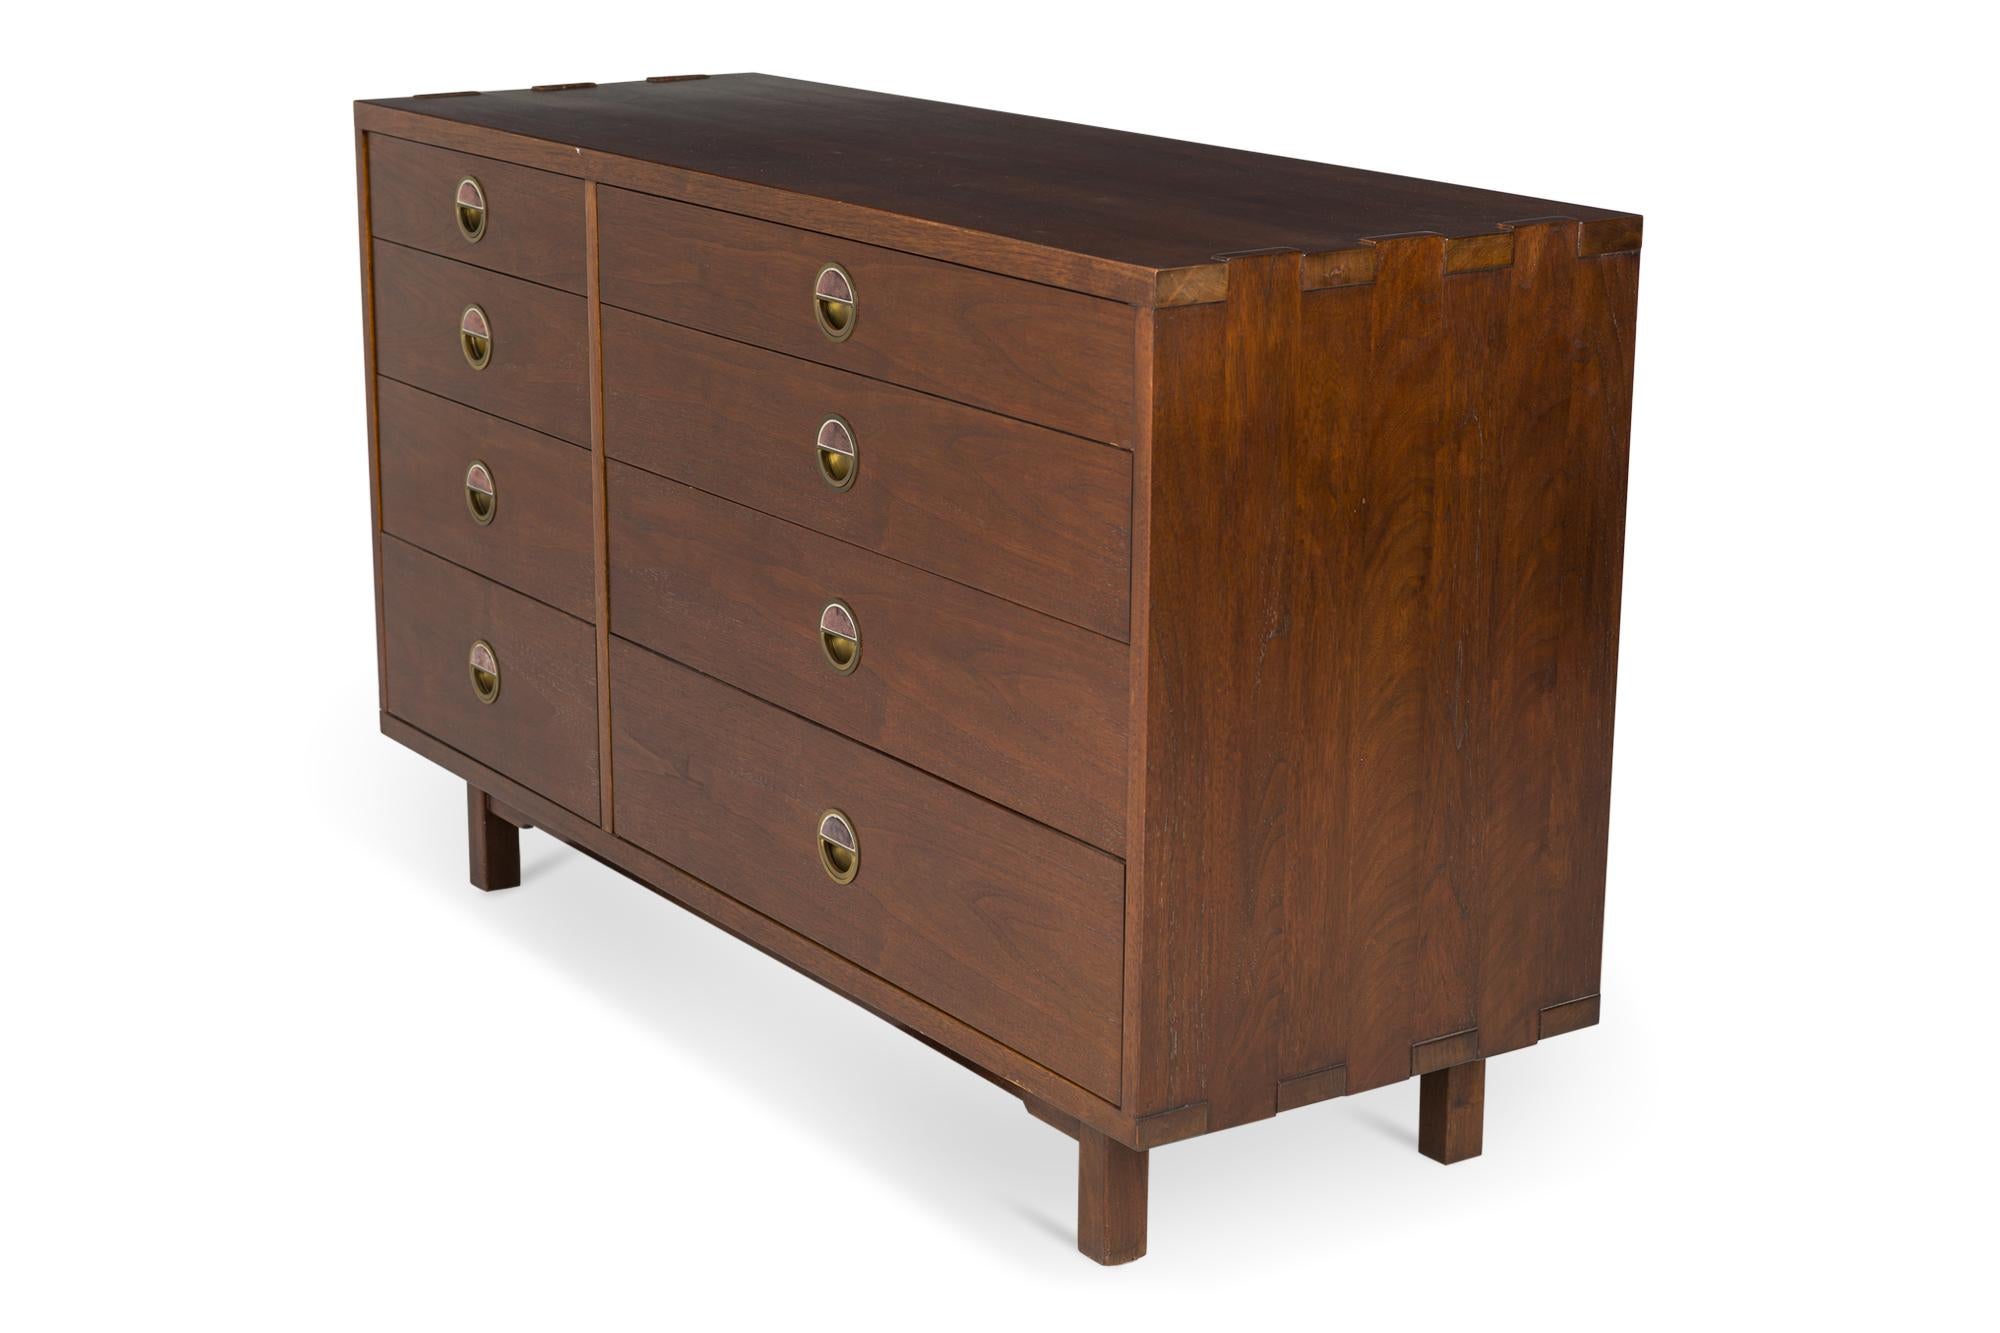 American mid-century walnut eight-drawer chest comprised of a narrow set of drawers on the left and a wider set of drawers on the right , all with drawer pulls made of brass and Natzler ceramic half-moon burgundy tiles, resting on four square walnut